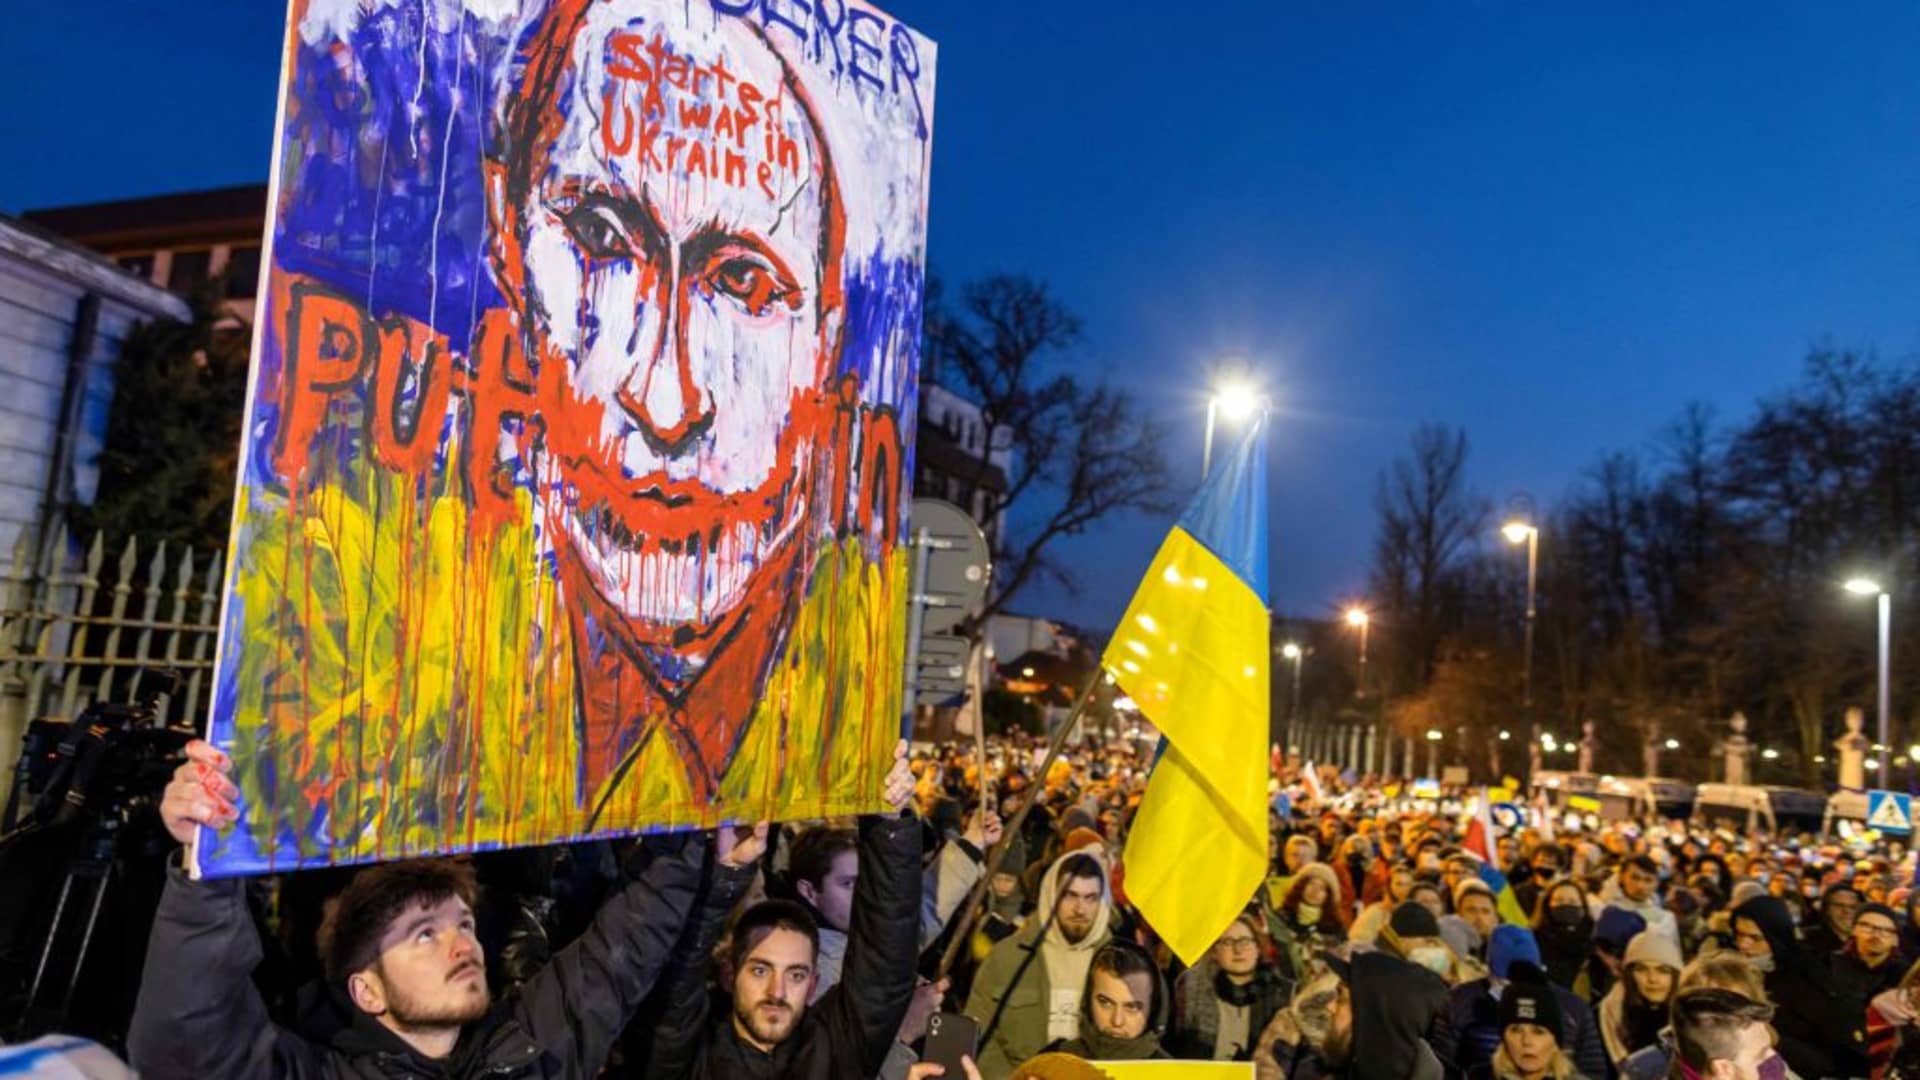 Demonstrators take part in the protest against Russia's agression on Ukraine, in front of Russian embassy in Warsaw, on February 24, 2022.